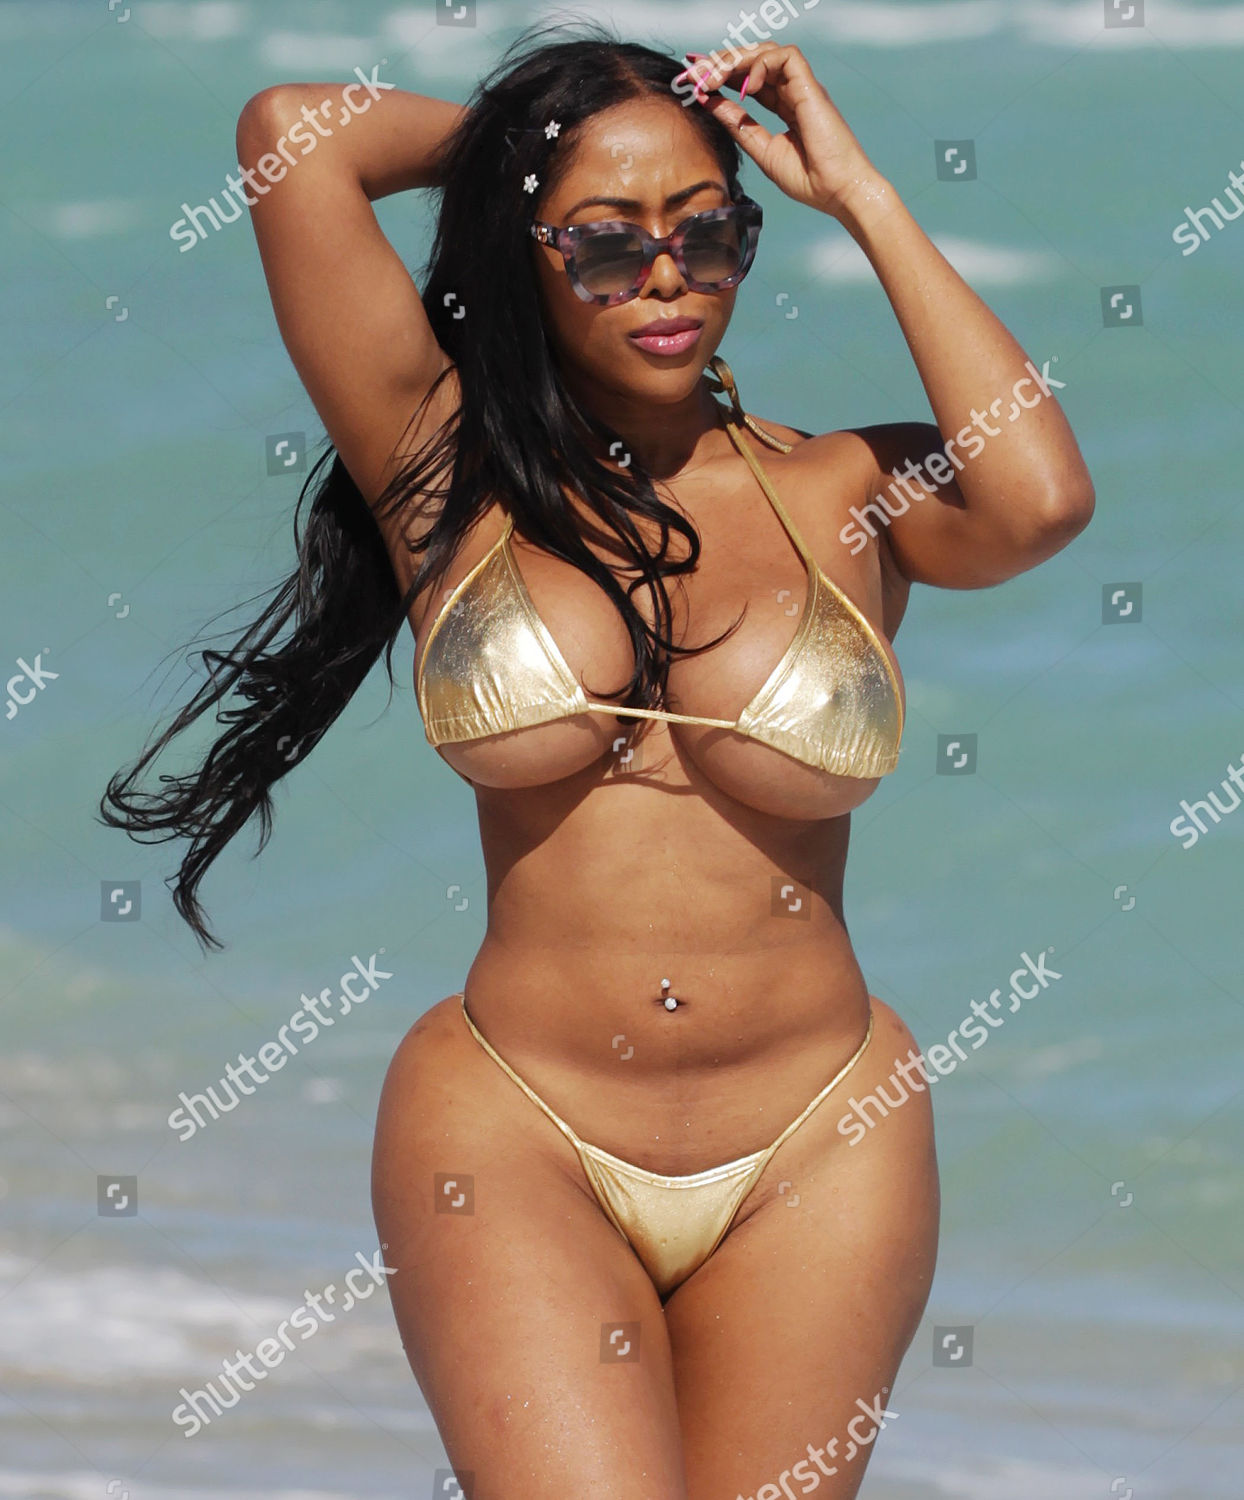 Moriah Mills Redaktionelles Stockfoto Stockbild Shutterstock Use the following search parameters to narrow your results https www shutterstock com de editorial image editorial moriah mills out and about miami beach florida usa 16 jan 2018 9323998e